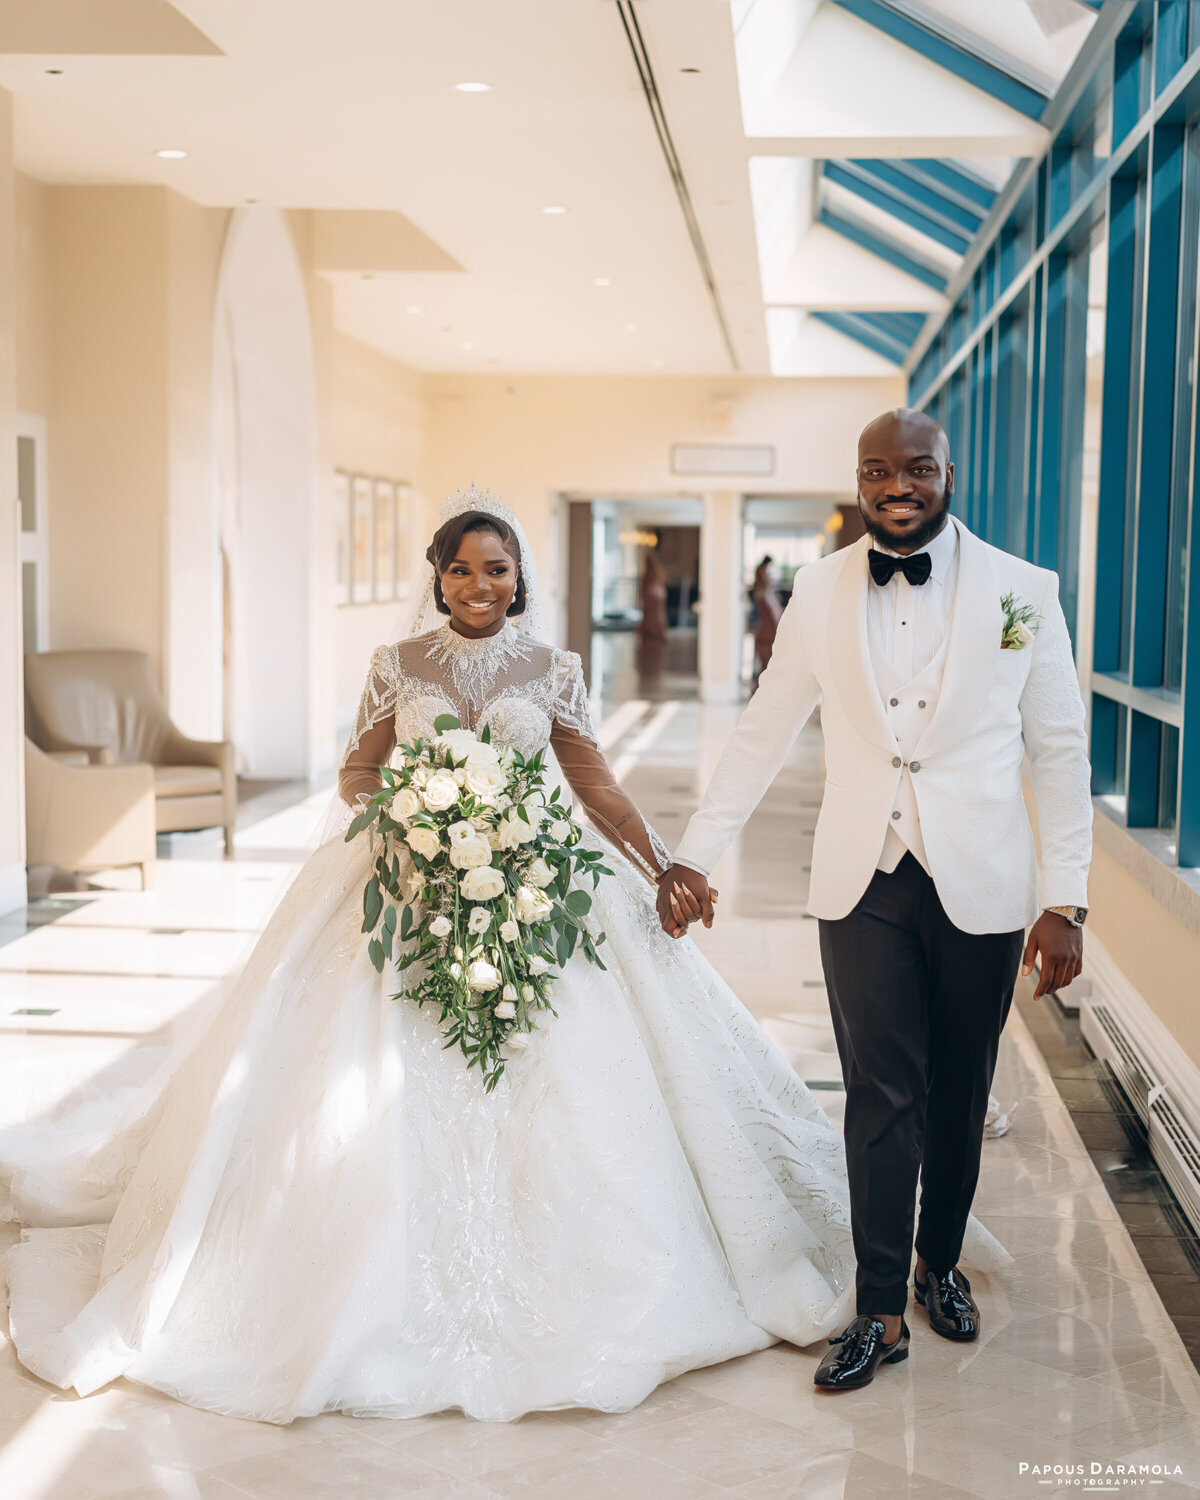 Abigail and Abije Oruka Events Papouse photographer Wedding event planners Toronto planner African Nigerian Eyitayo Dada Dara Ayoola outdoor ceremony floral princess ballgown rolls royce groom suit potraits  paradise banquet hall vaughn 152